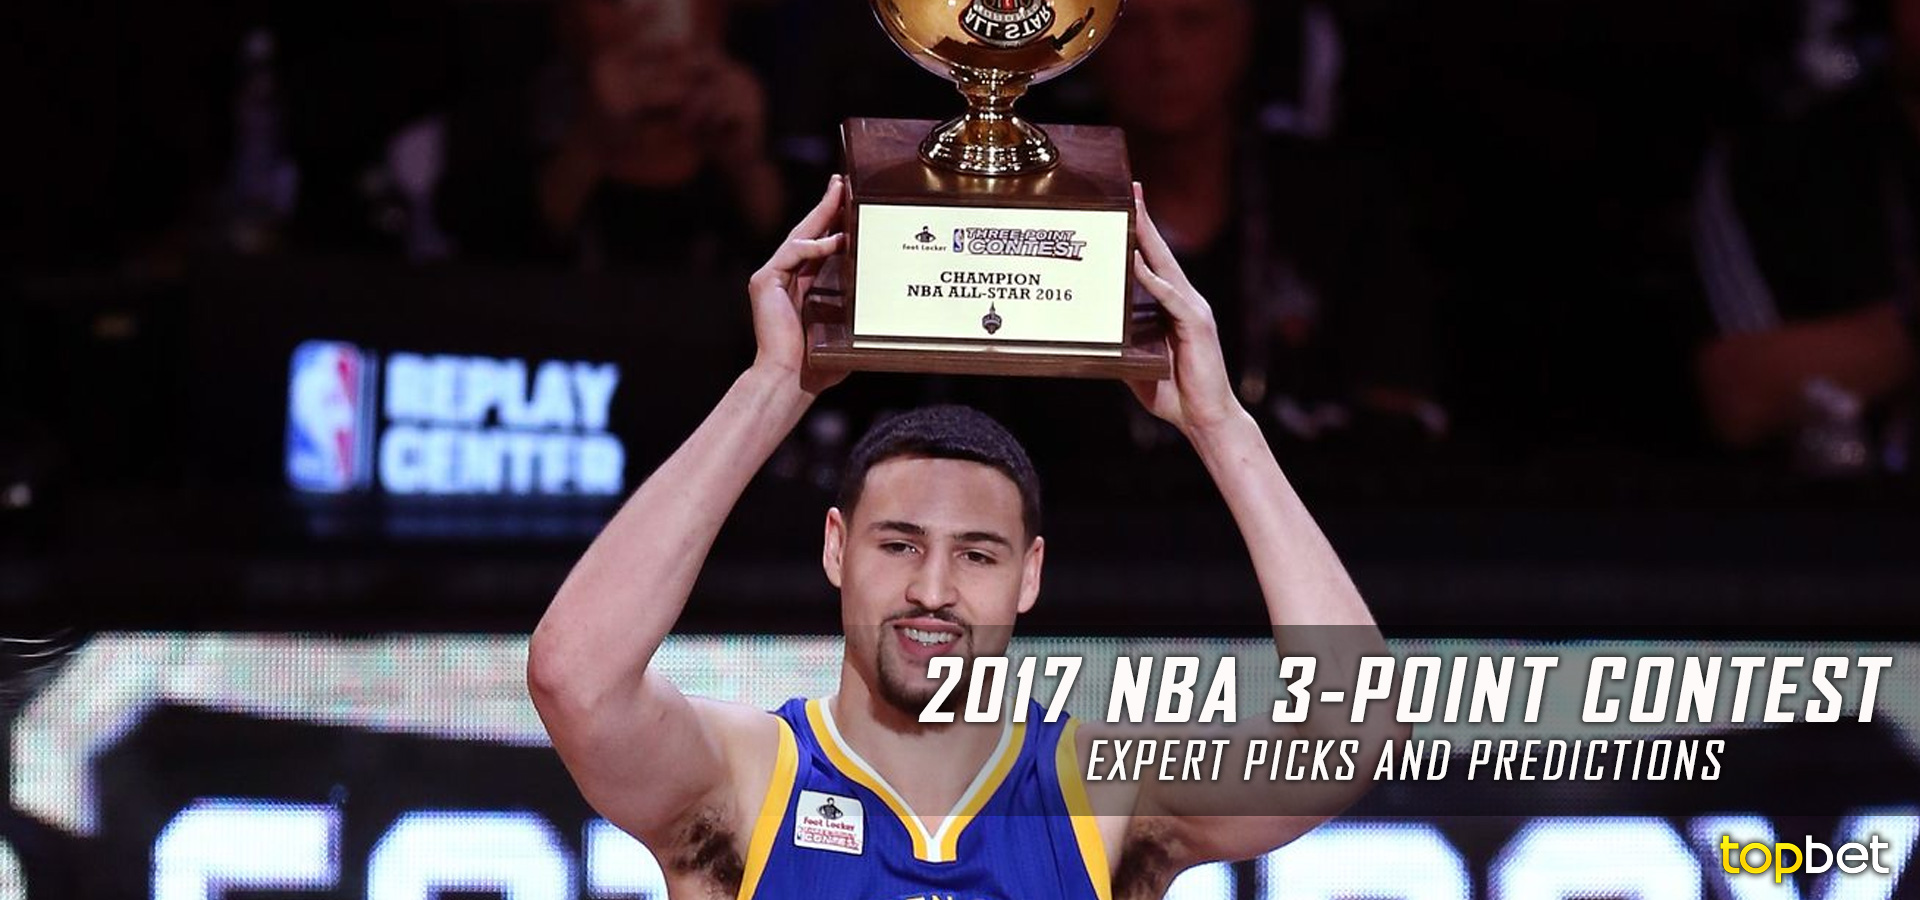 2017 NBA 3-Point Contest Expert Picks and Predictions